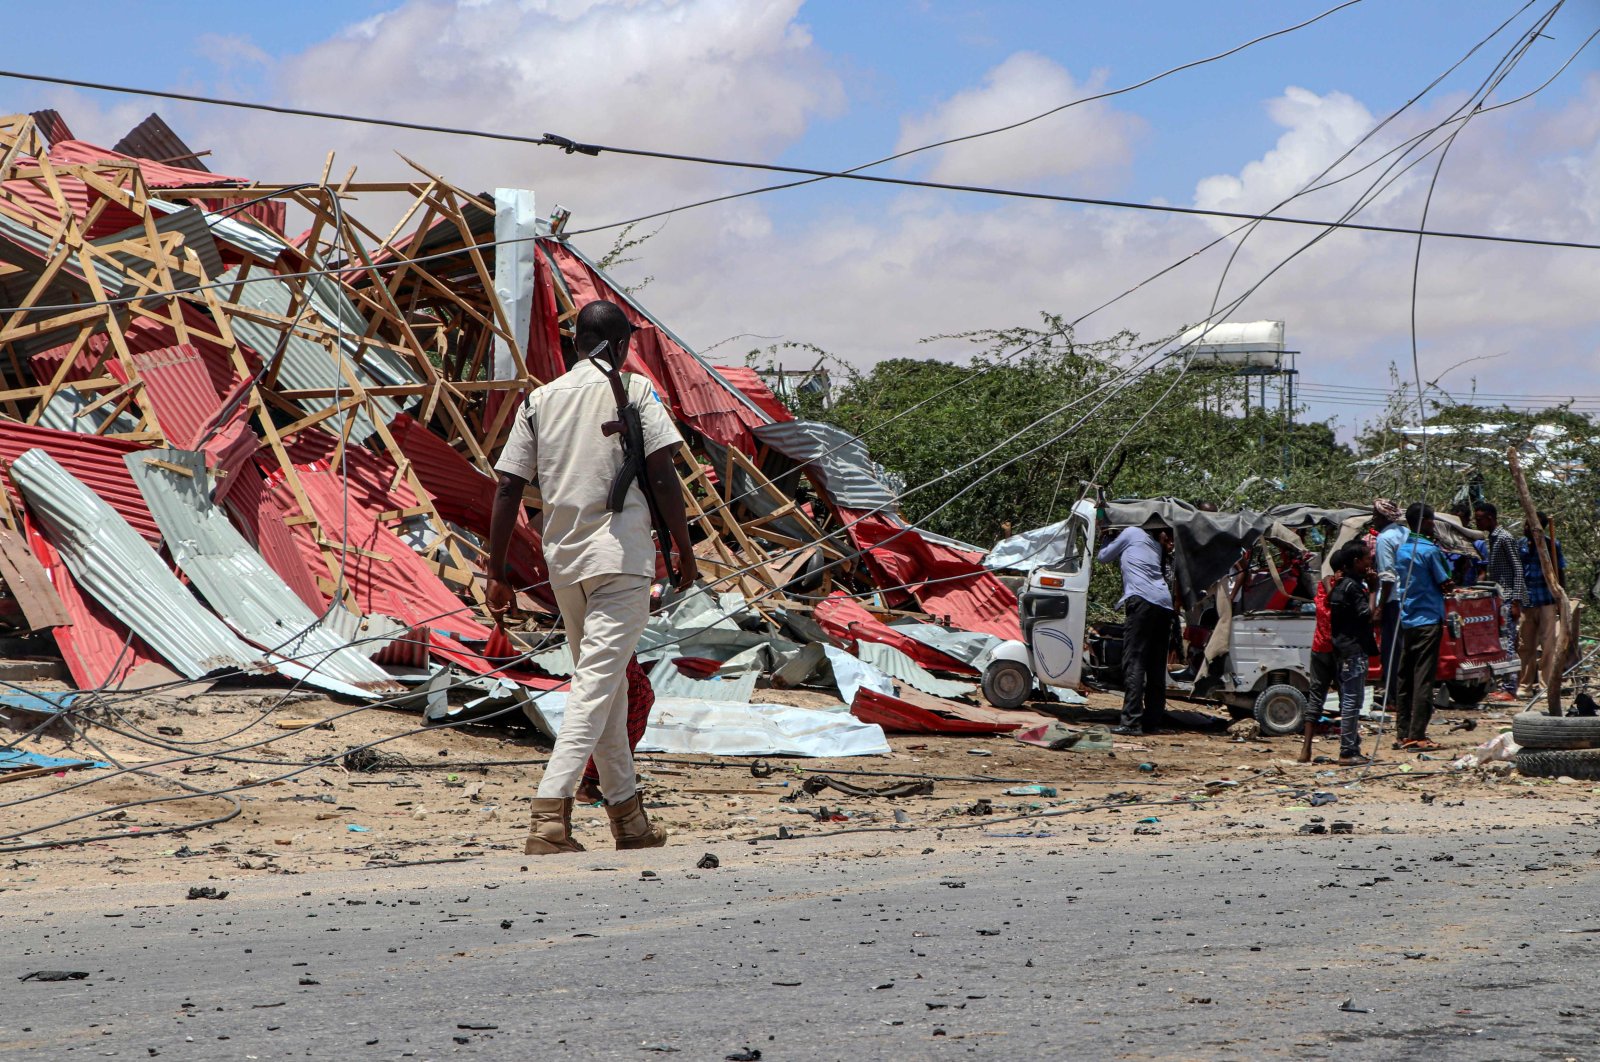 A Somali police officer patrols (L) as bystanders gather at the site of a suicide car bomb explosion that targeted a European Union vehicle convoy in Mogadishu, Somalia, on Sept. 30, 2019. (AFP Photo)